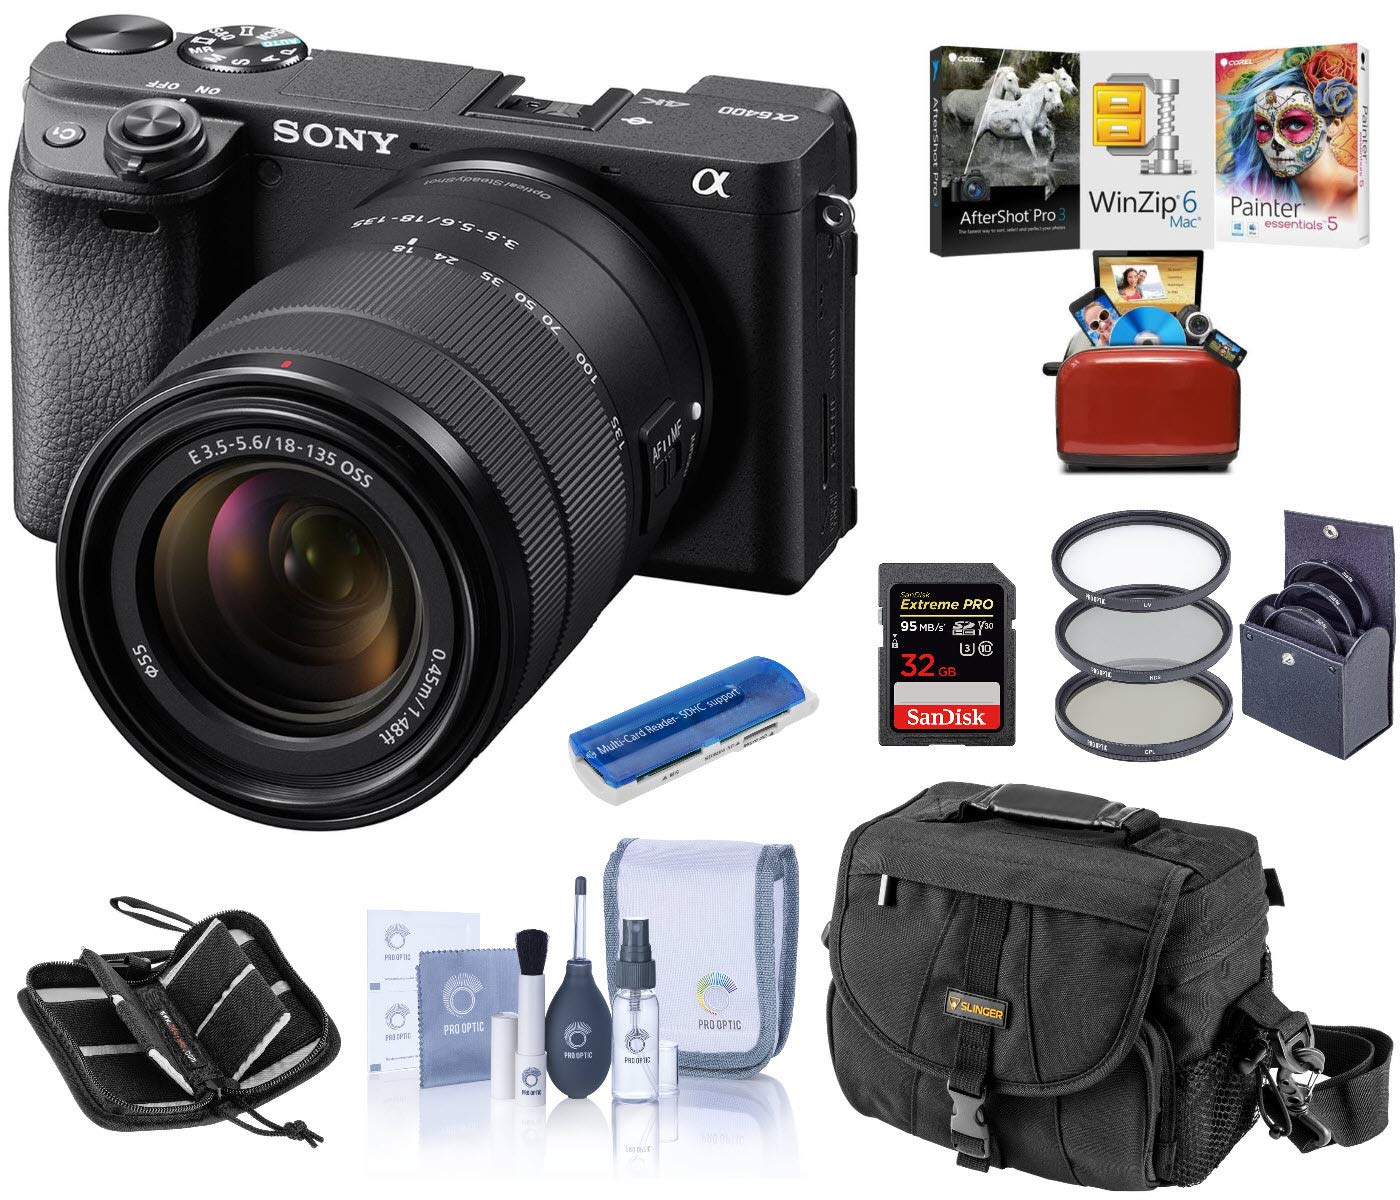 Alpha a6400 Mirrorless Digital Camera with 18-135mm f/3.5-5.6 OSS Lens - Bundle with Camera Case, 32GB SDHC Card, 55mm Filter Kit, Cleaning Kit, Card Reader, Memory Wallet, Mac Software Pack